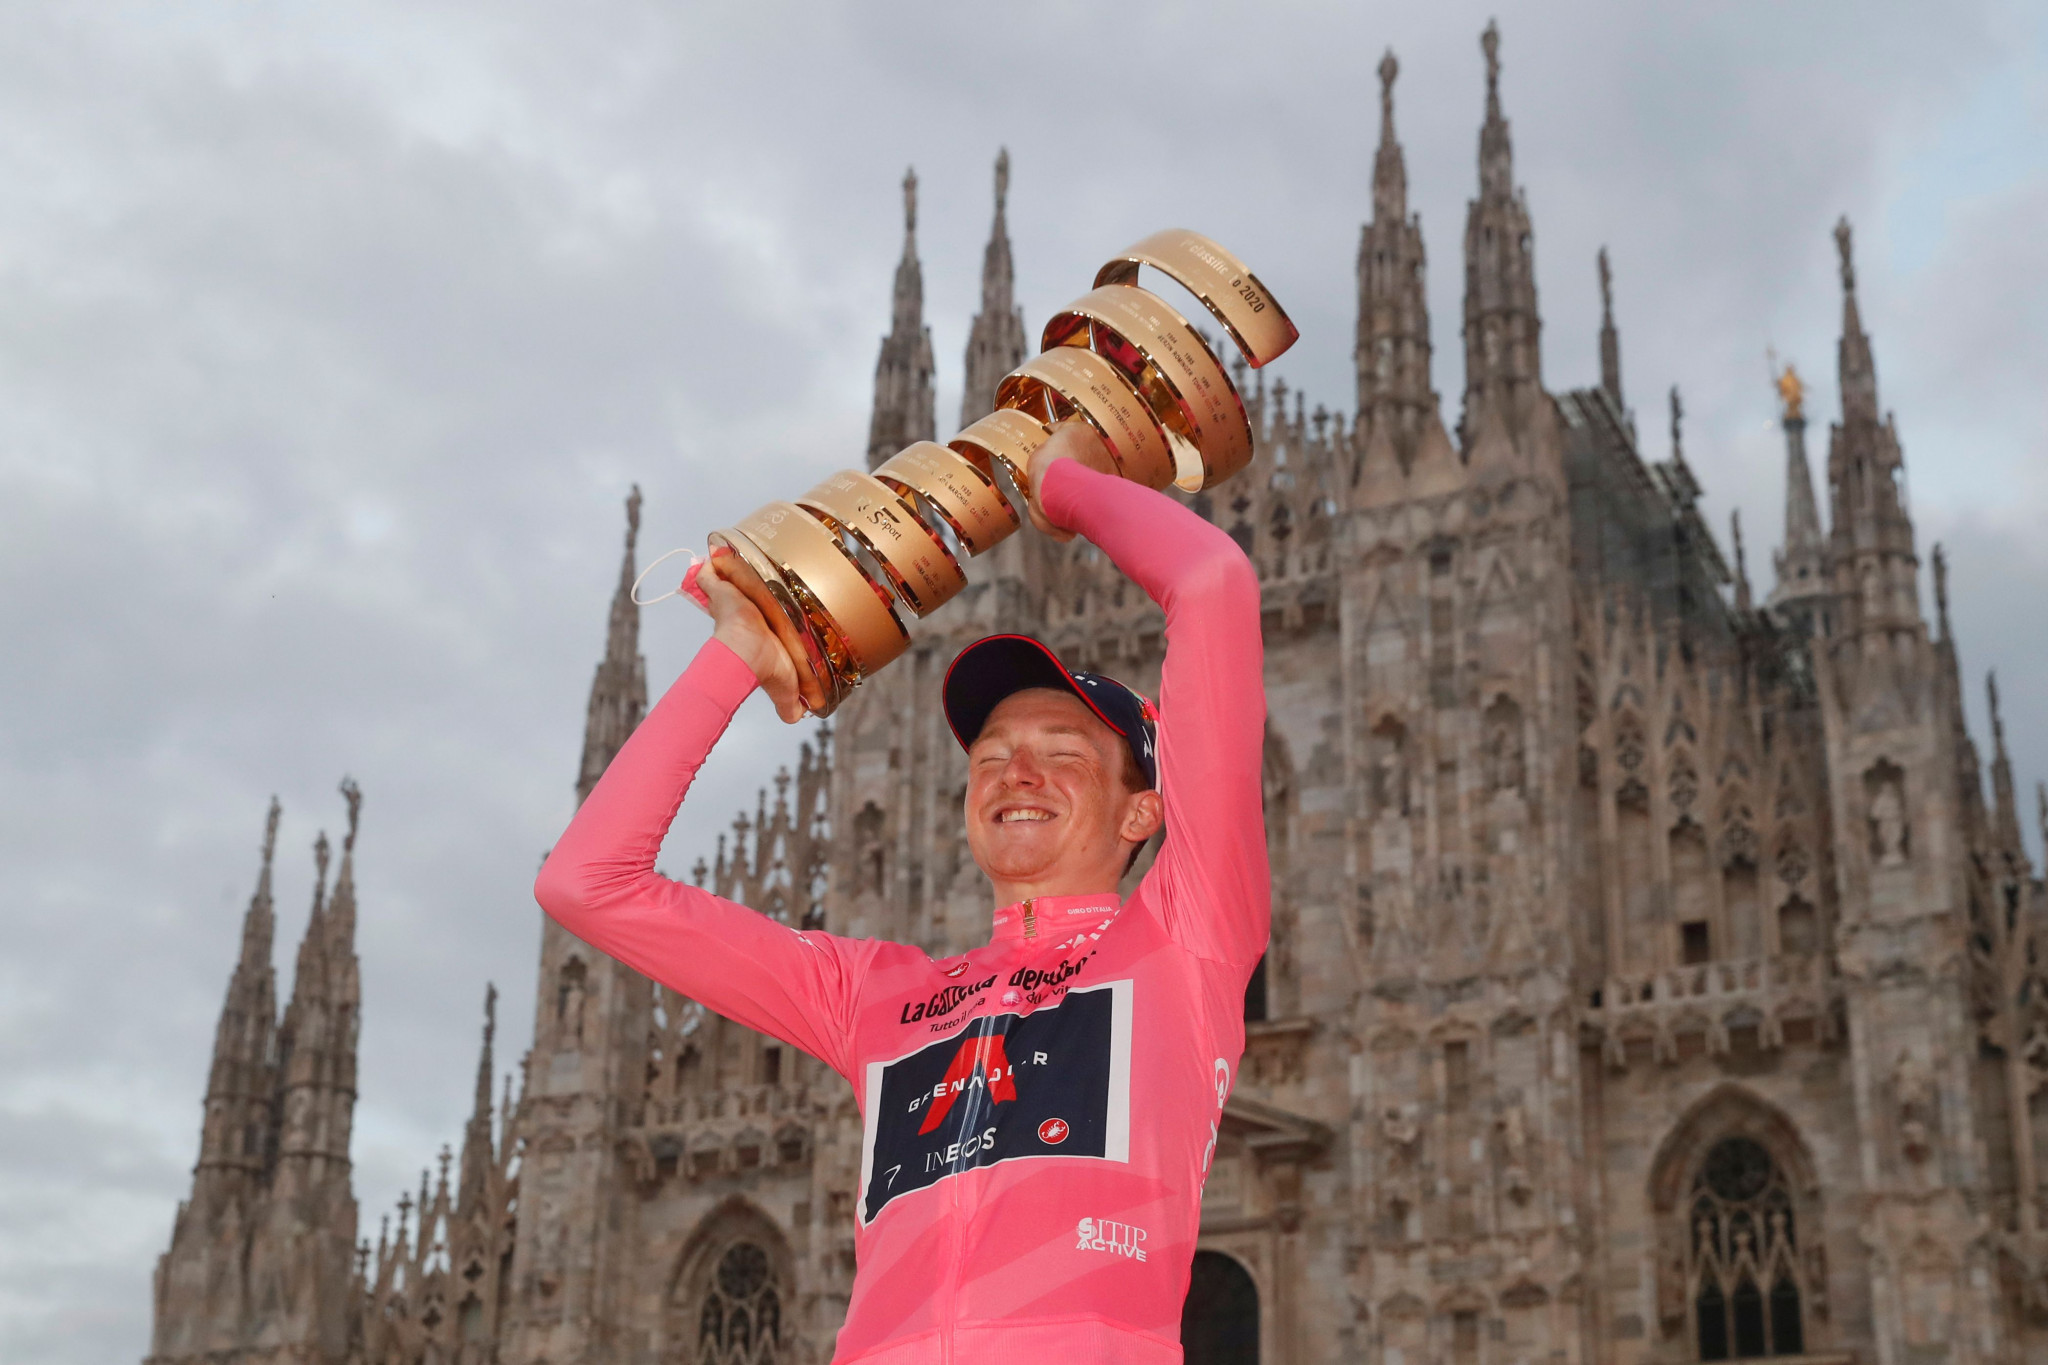 Rather than defending the Giro d'Italia title, of which he was a surprise winner last year, Britain's Tao Geoghegan Hart will concentrate on making his Tour de France debut and seek to contest the Tokyo Olympic road race ©Getty Images